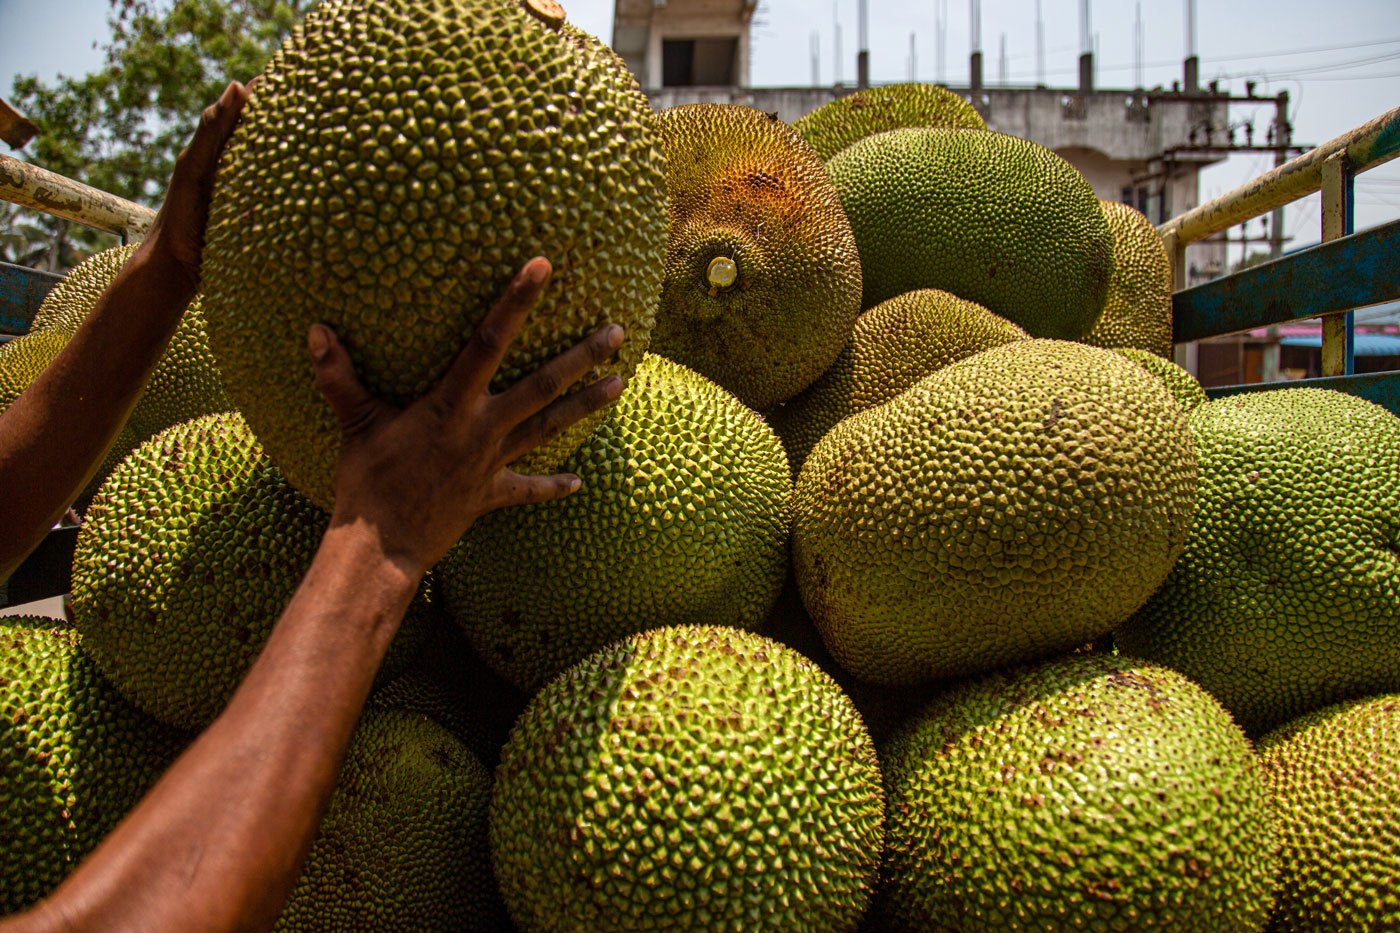 With their distinctive shape, smell and structure, jackfruits are a sight to behold but not very easy to fetch, carry and transport